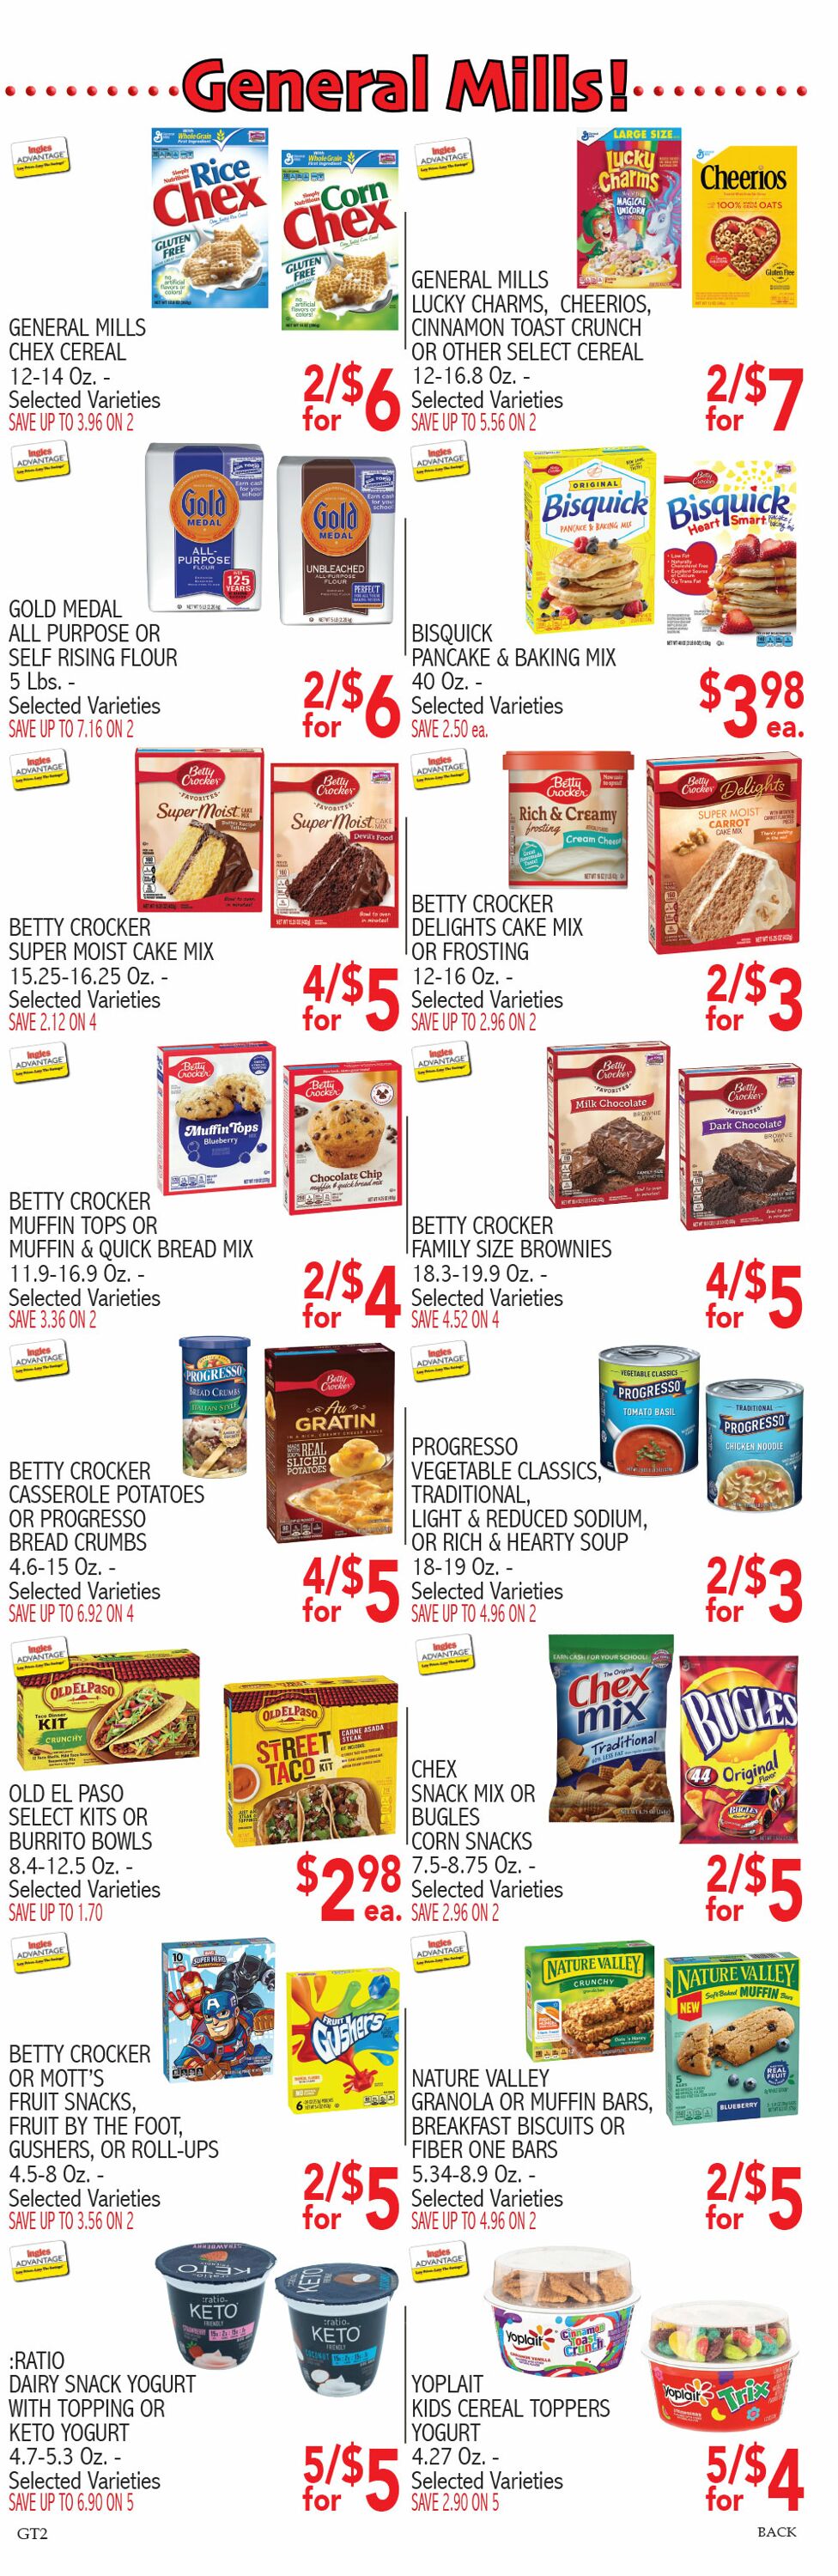 Ingles Ad from 11/09/2022